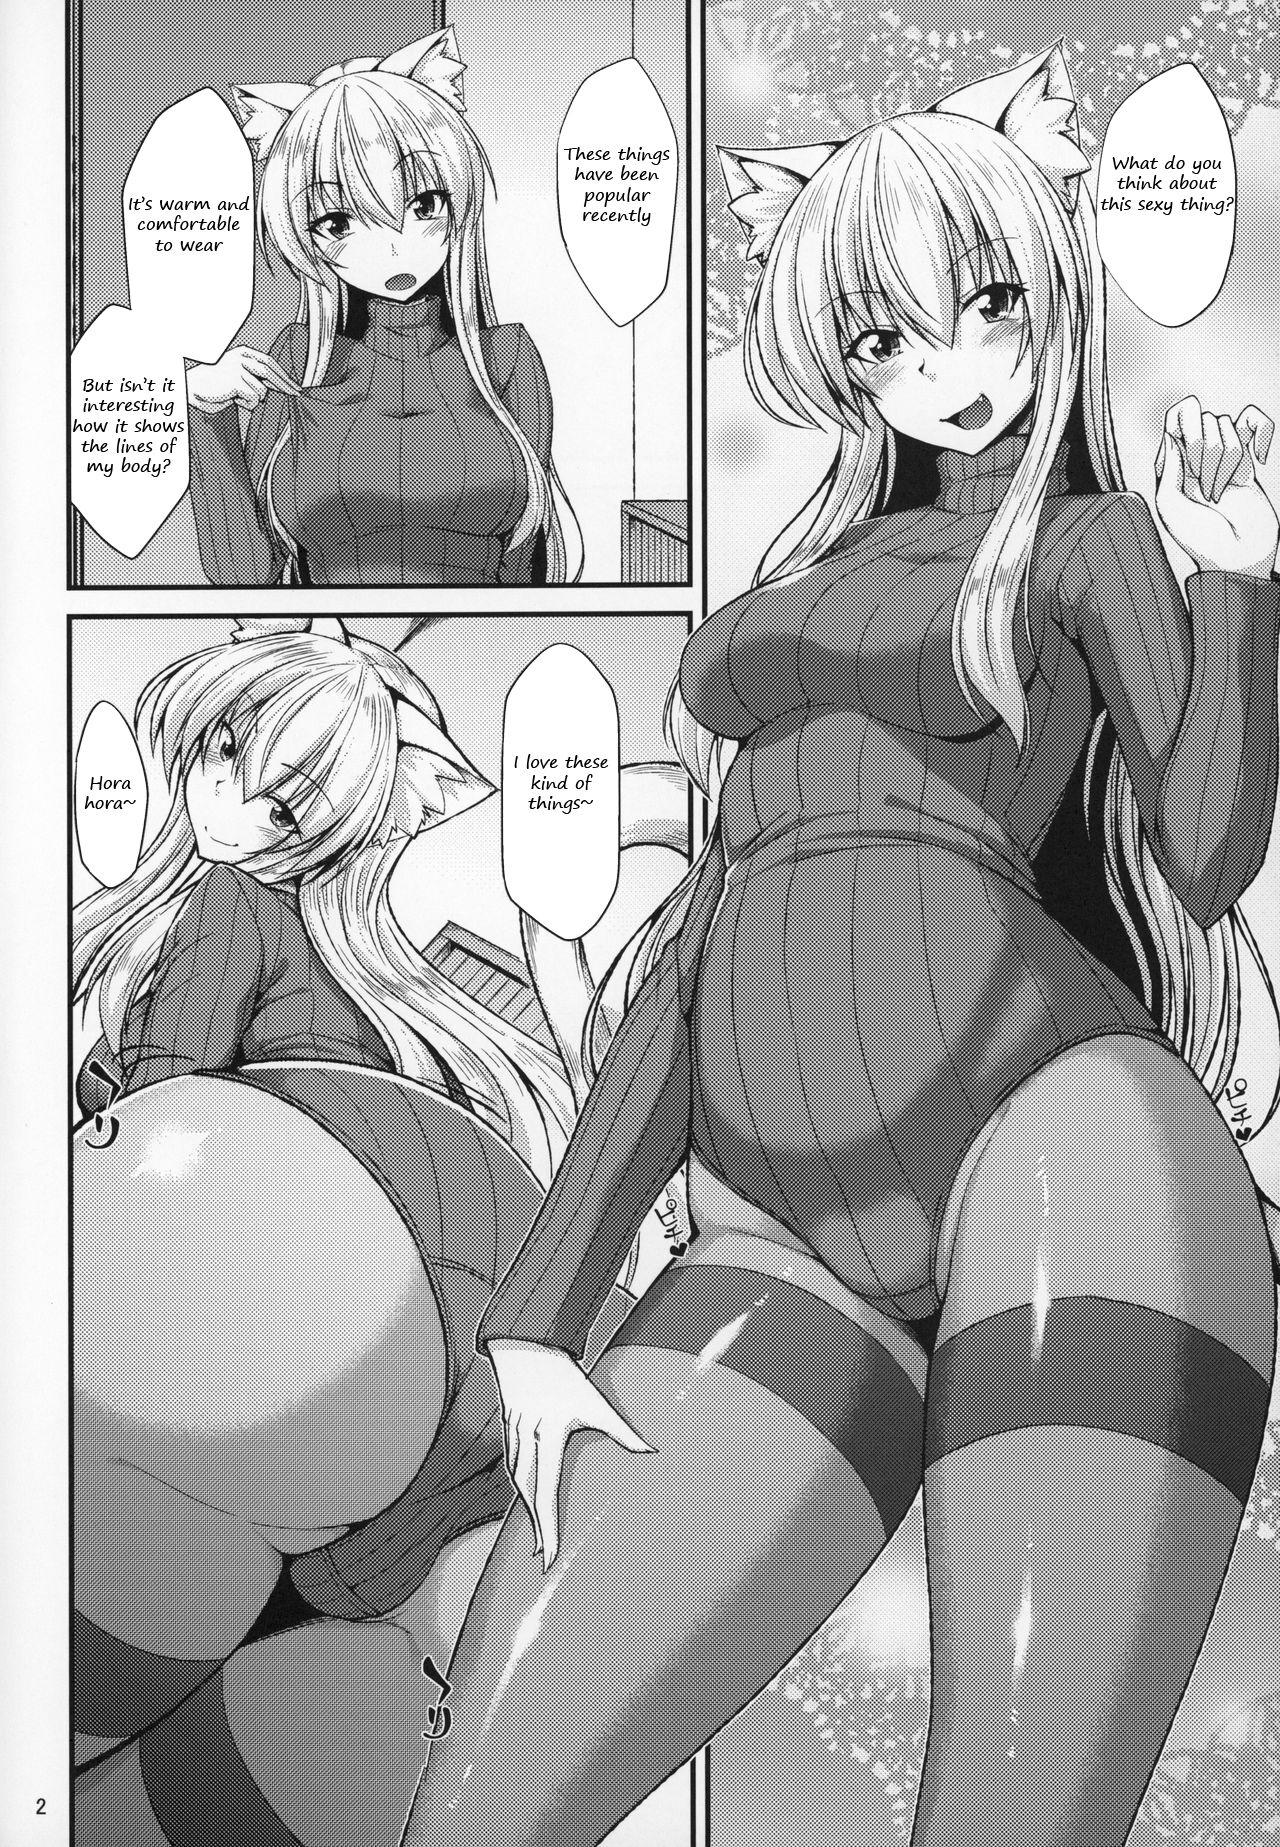 Missionary Position Porn (C97) [ENNUI (Nokoppa)] Nekomimi Onee-san to Onaho de Nyan Nyan | The cat-eared Onee-san and the Onahole [English] - Original Gay Money - Picture 3